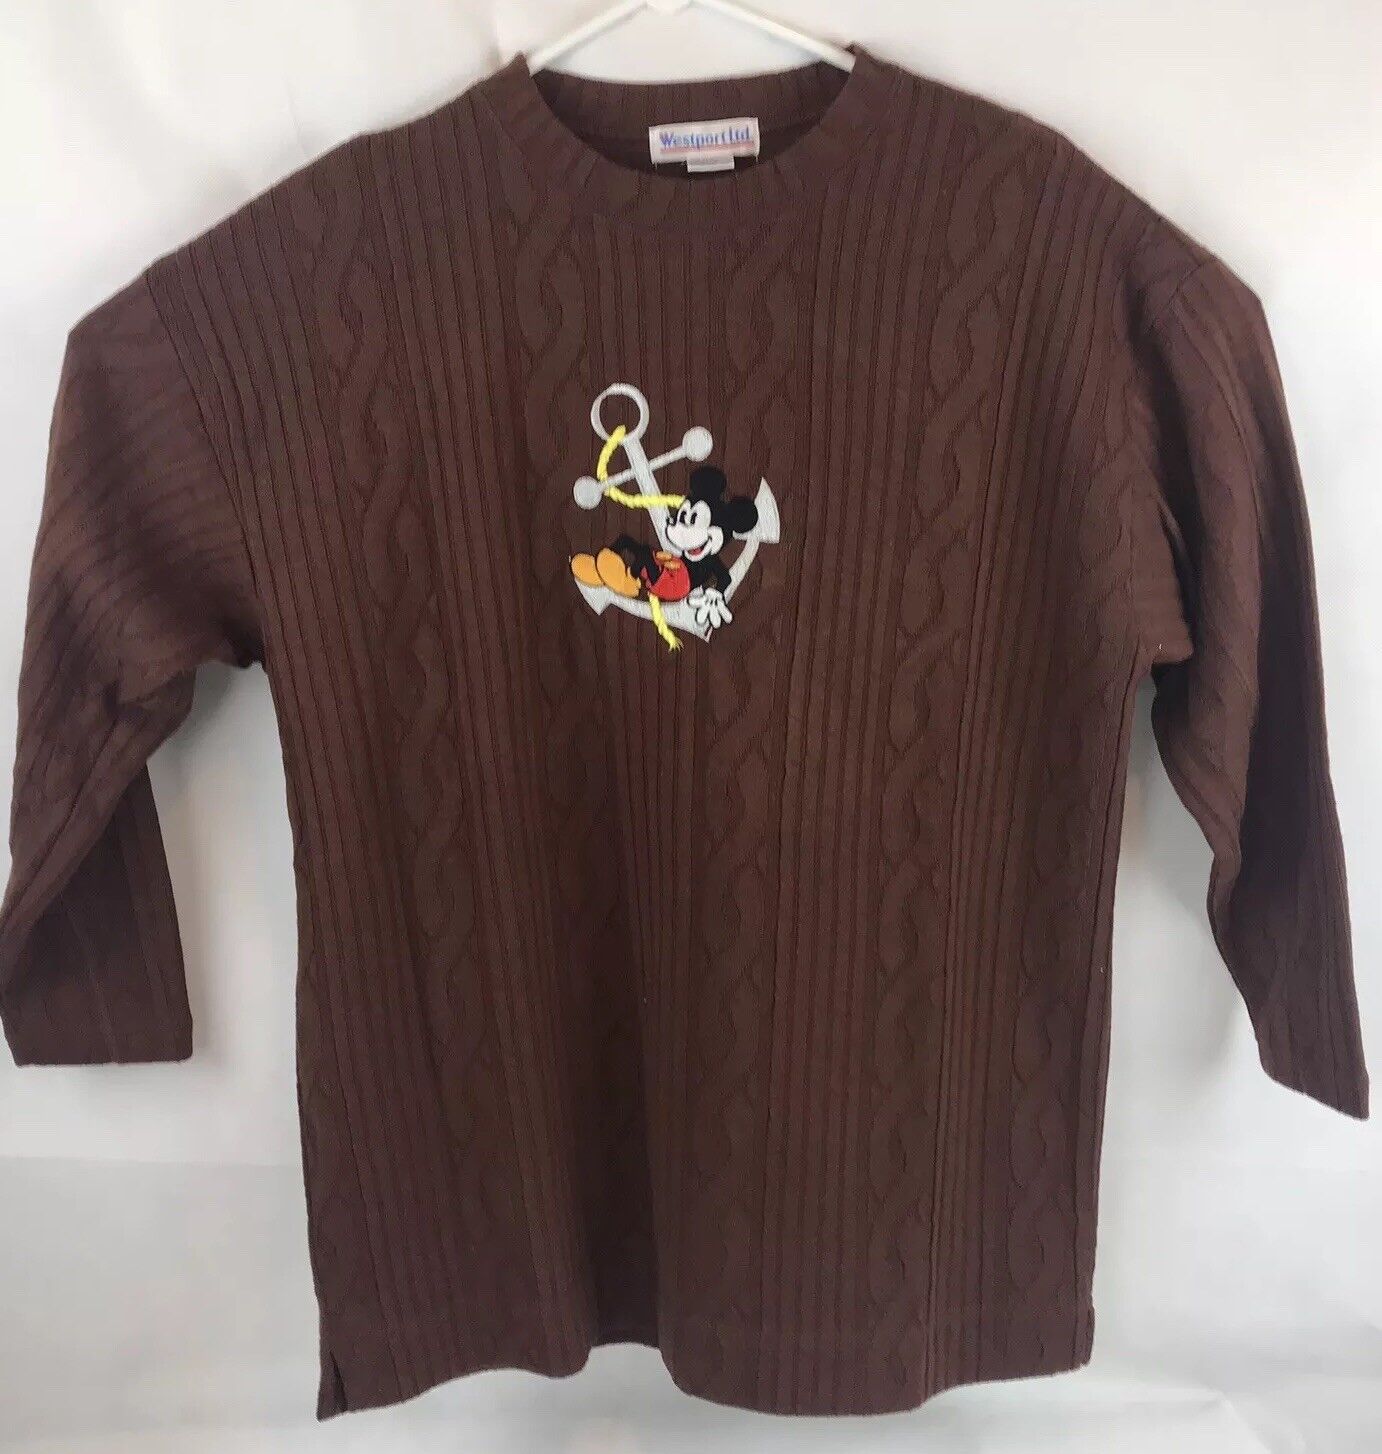 Vintage Women’s Mickey Mouse Sweater Ship Anchor Embroidered Brown Crewneck Sz M